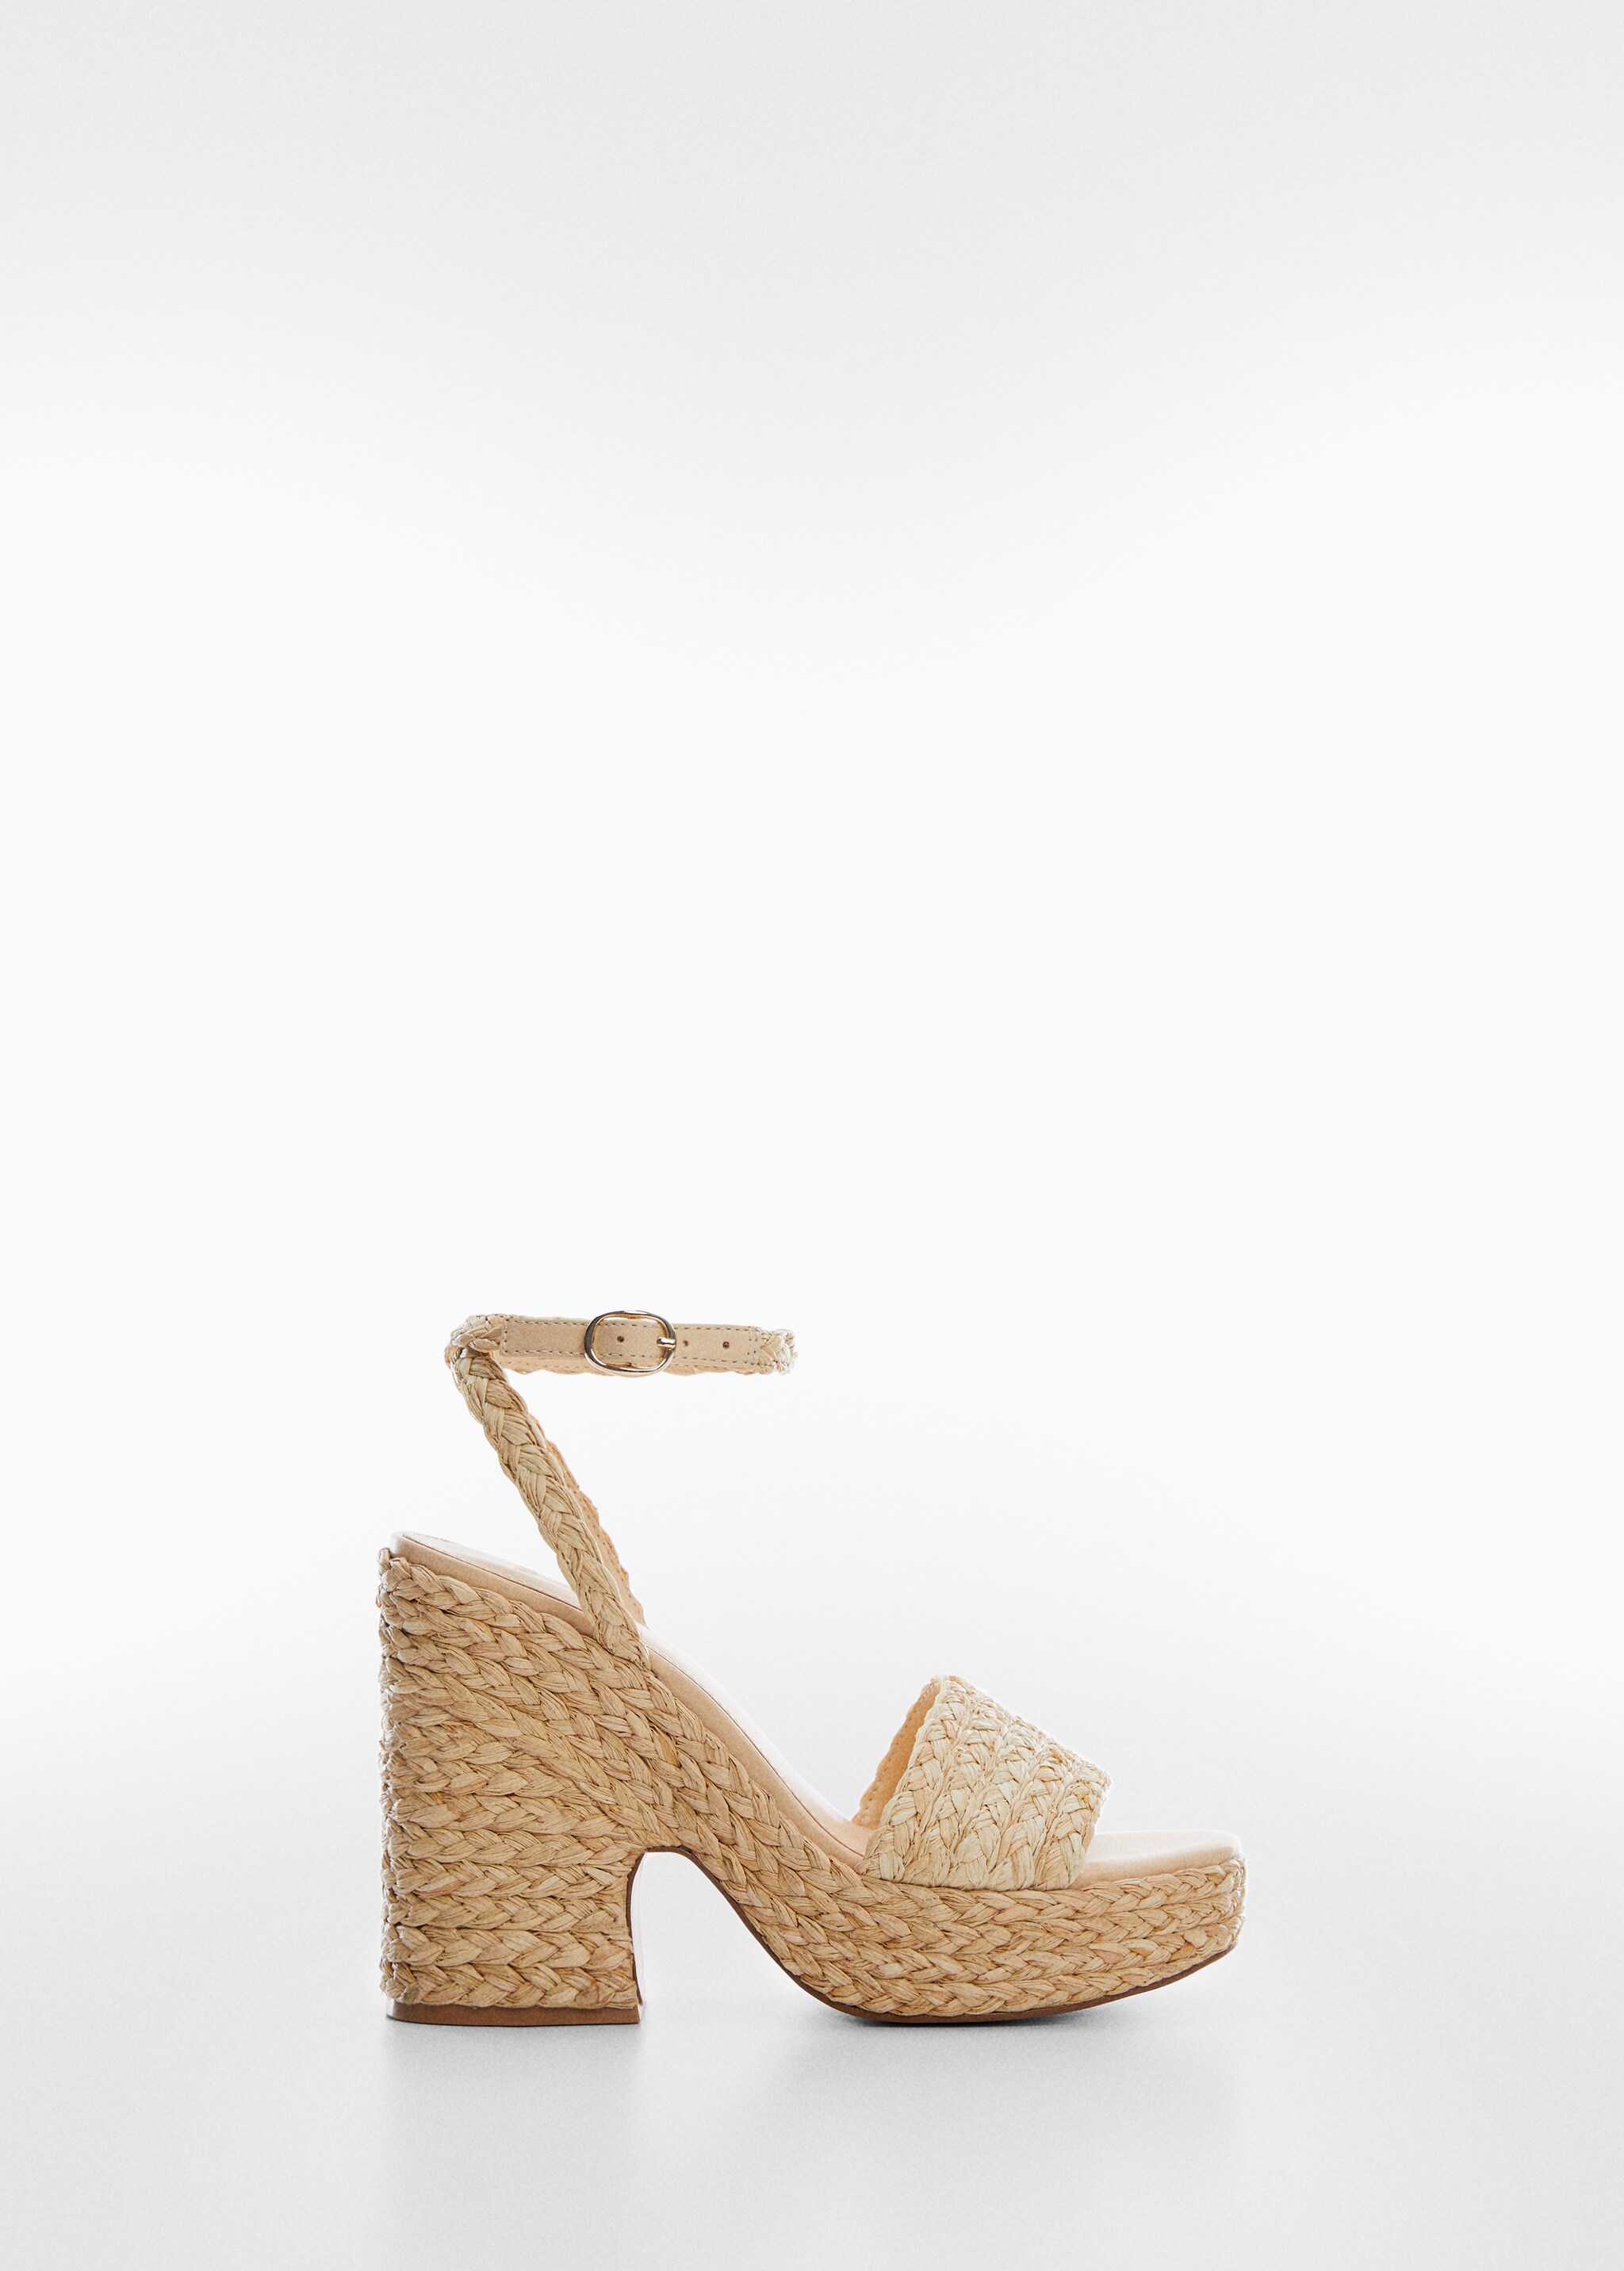 Raffia braided sandals - Article without model